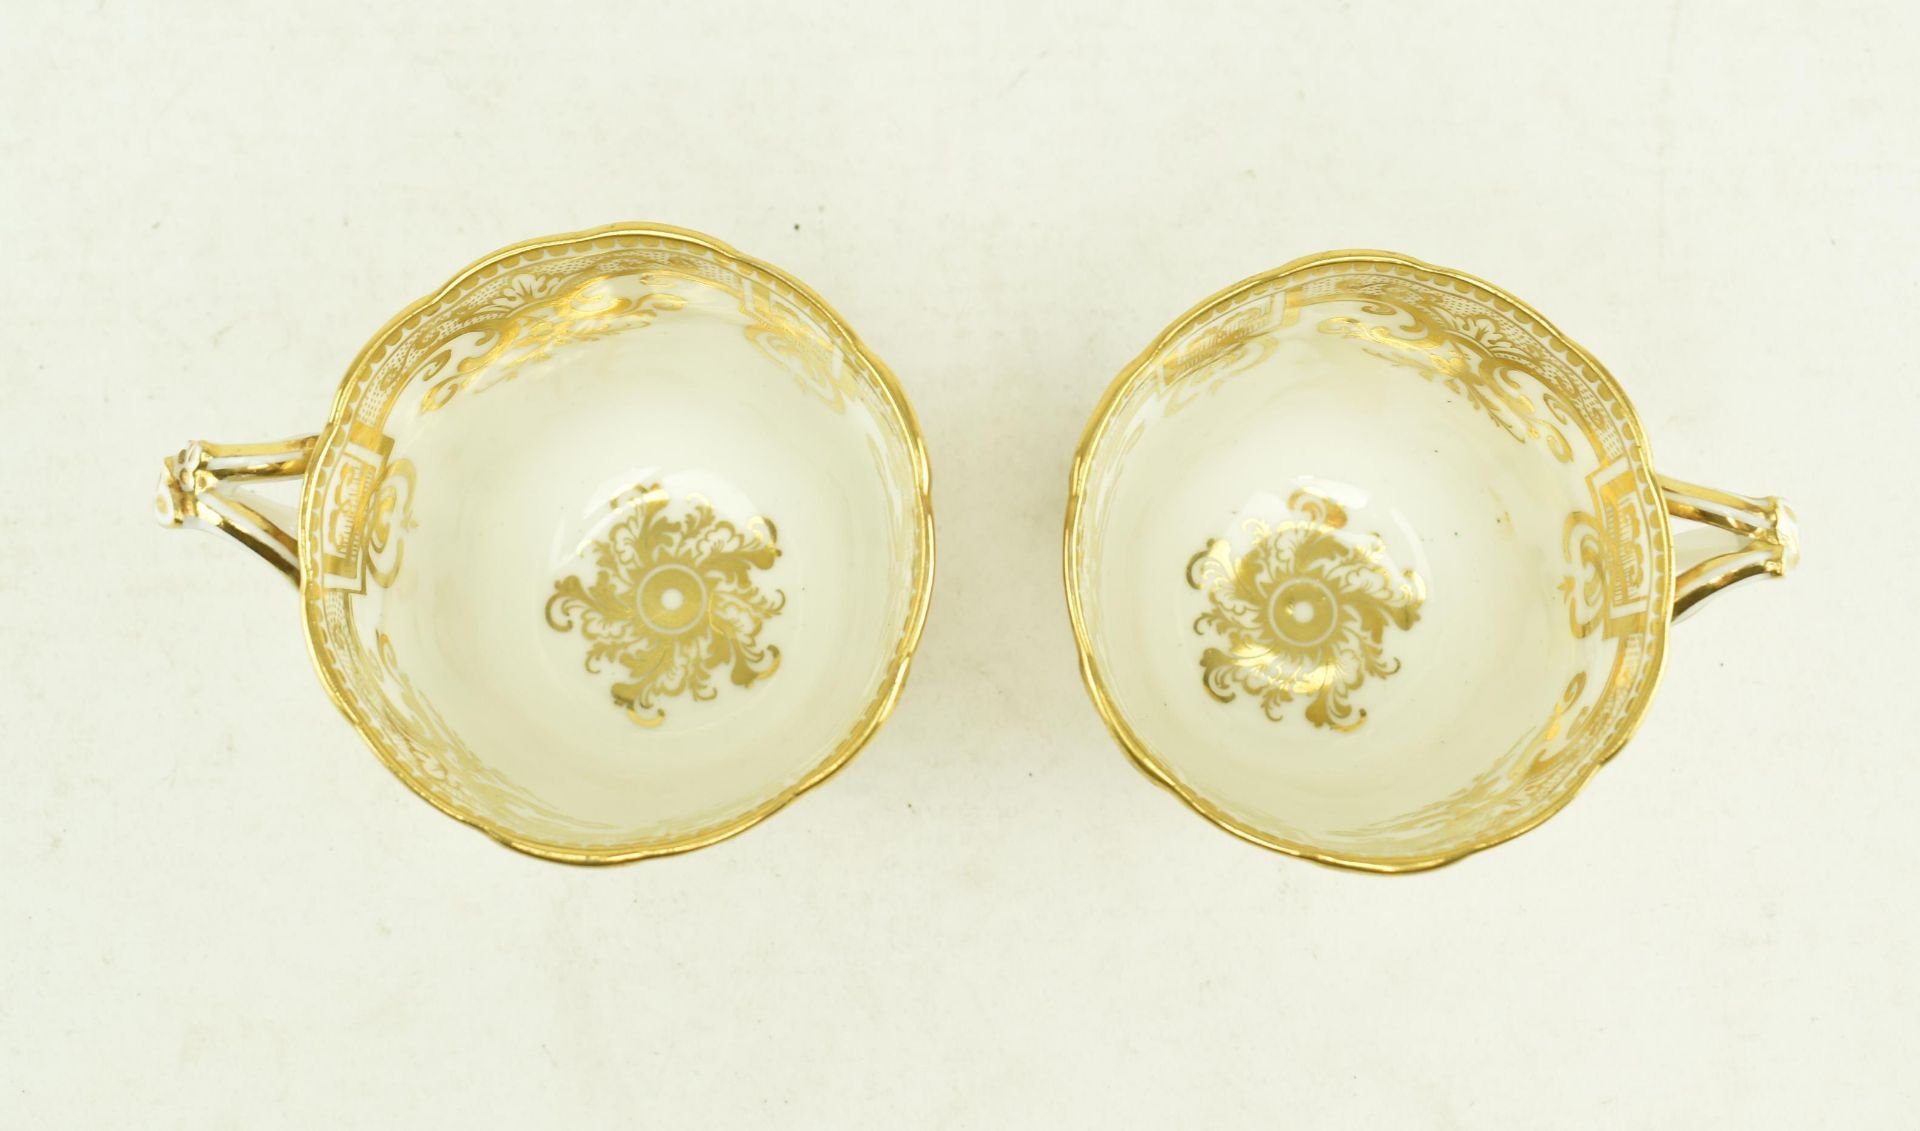 TWO MID 19TH CENTURY RIDGWAY PORCELAIN TEA CUPS WITH HANDLE - Image 3 of 4